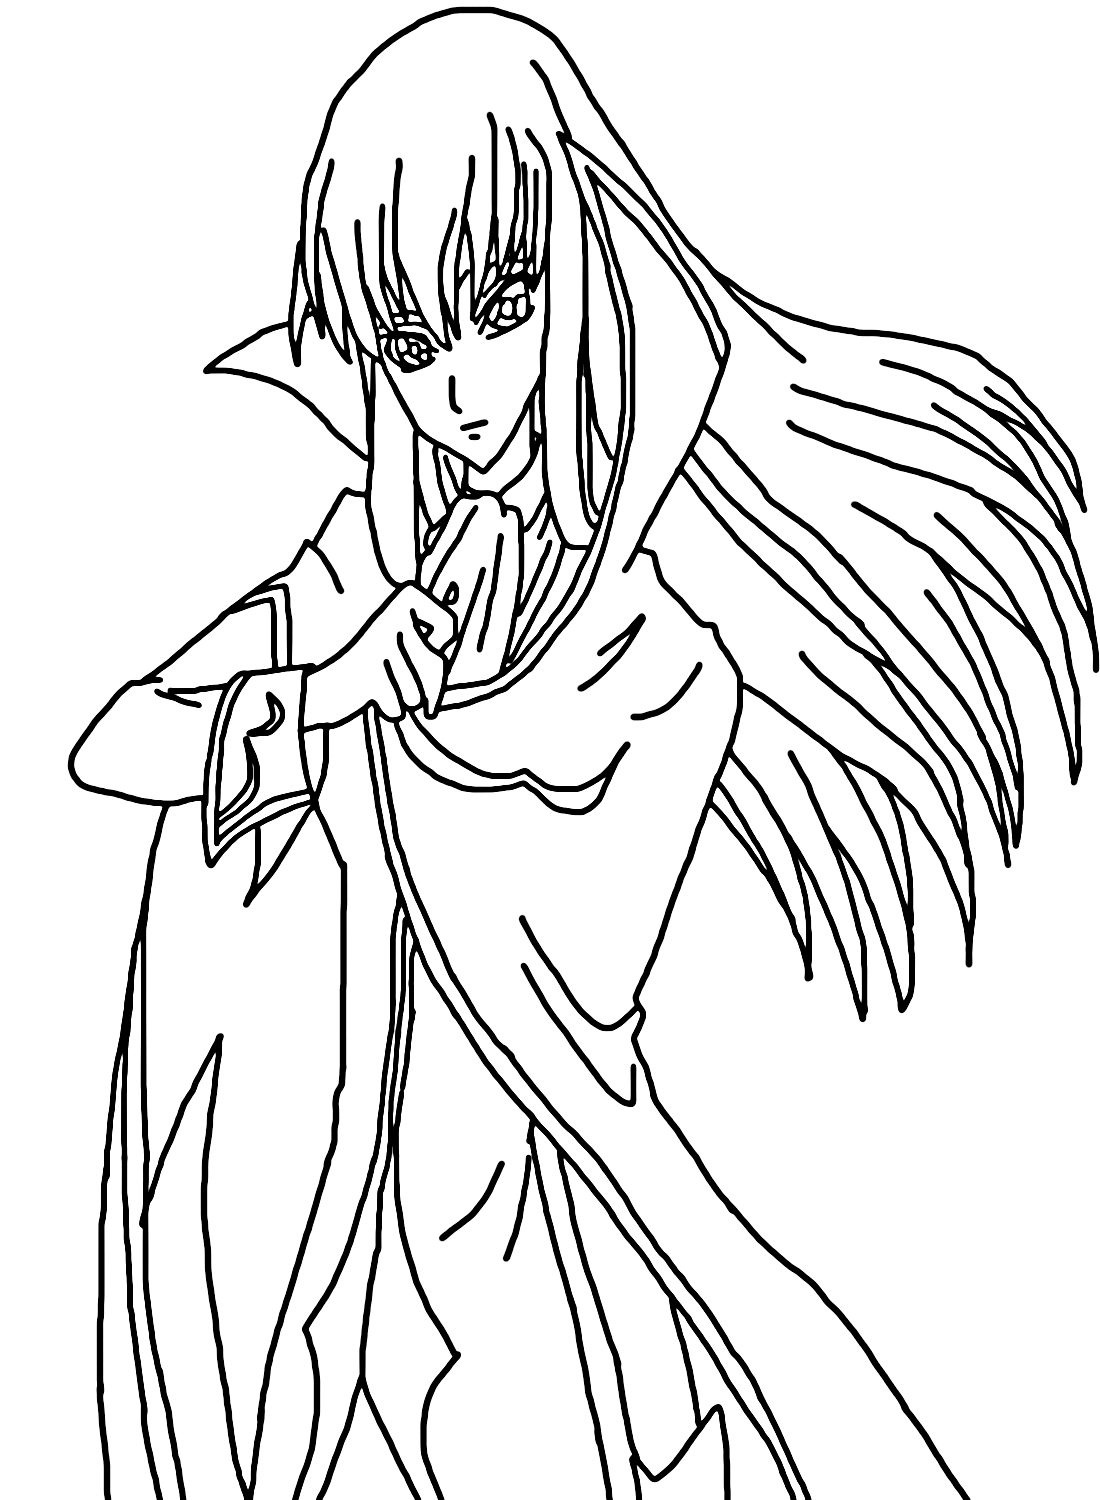 CC Code Geass Coloring Page PDF